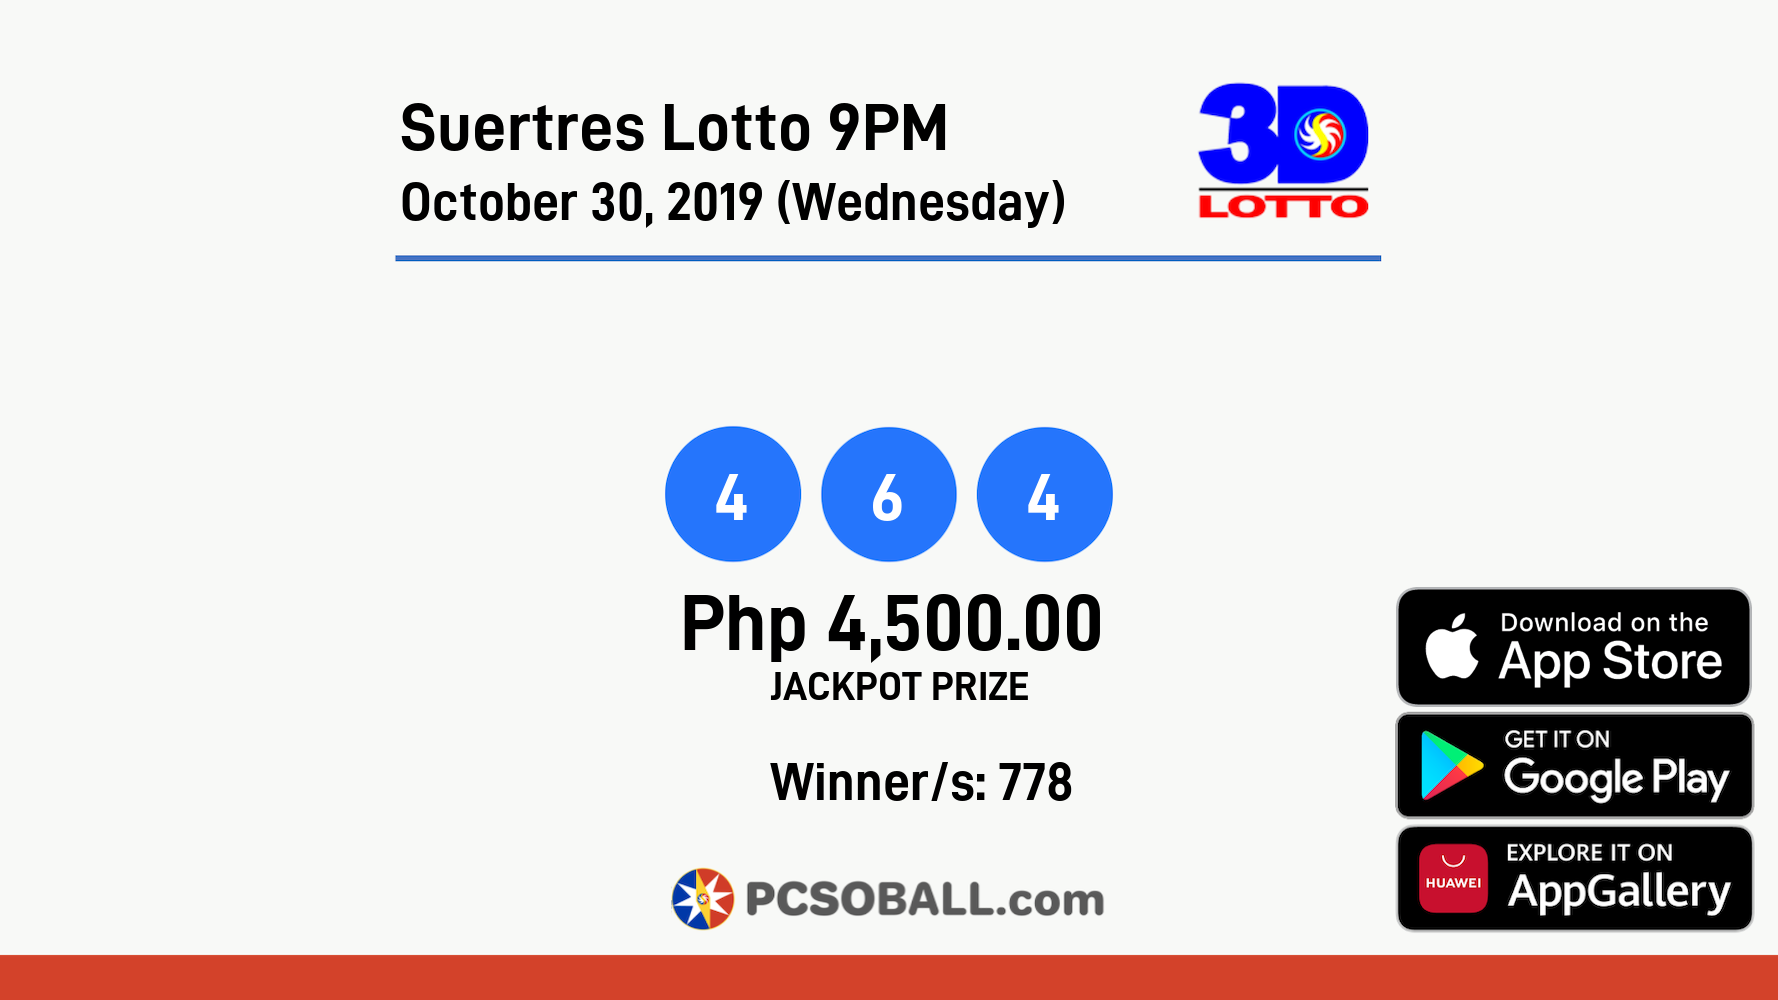 Suertres Lotto 9PM October 30, 2019 (Wednesday) Result